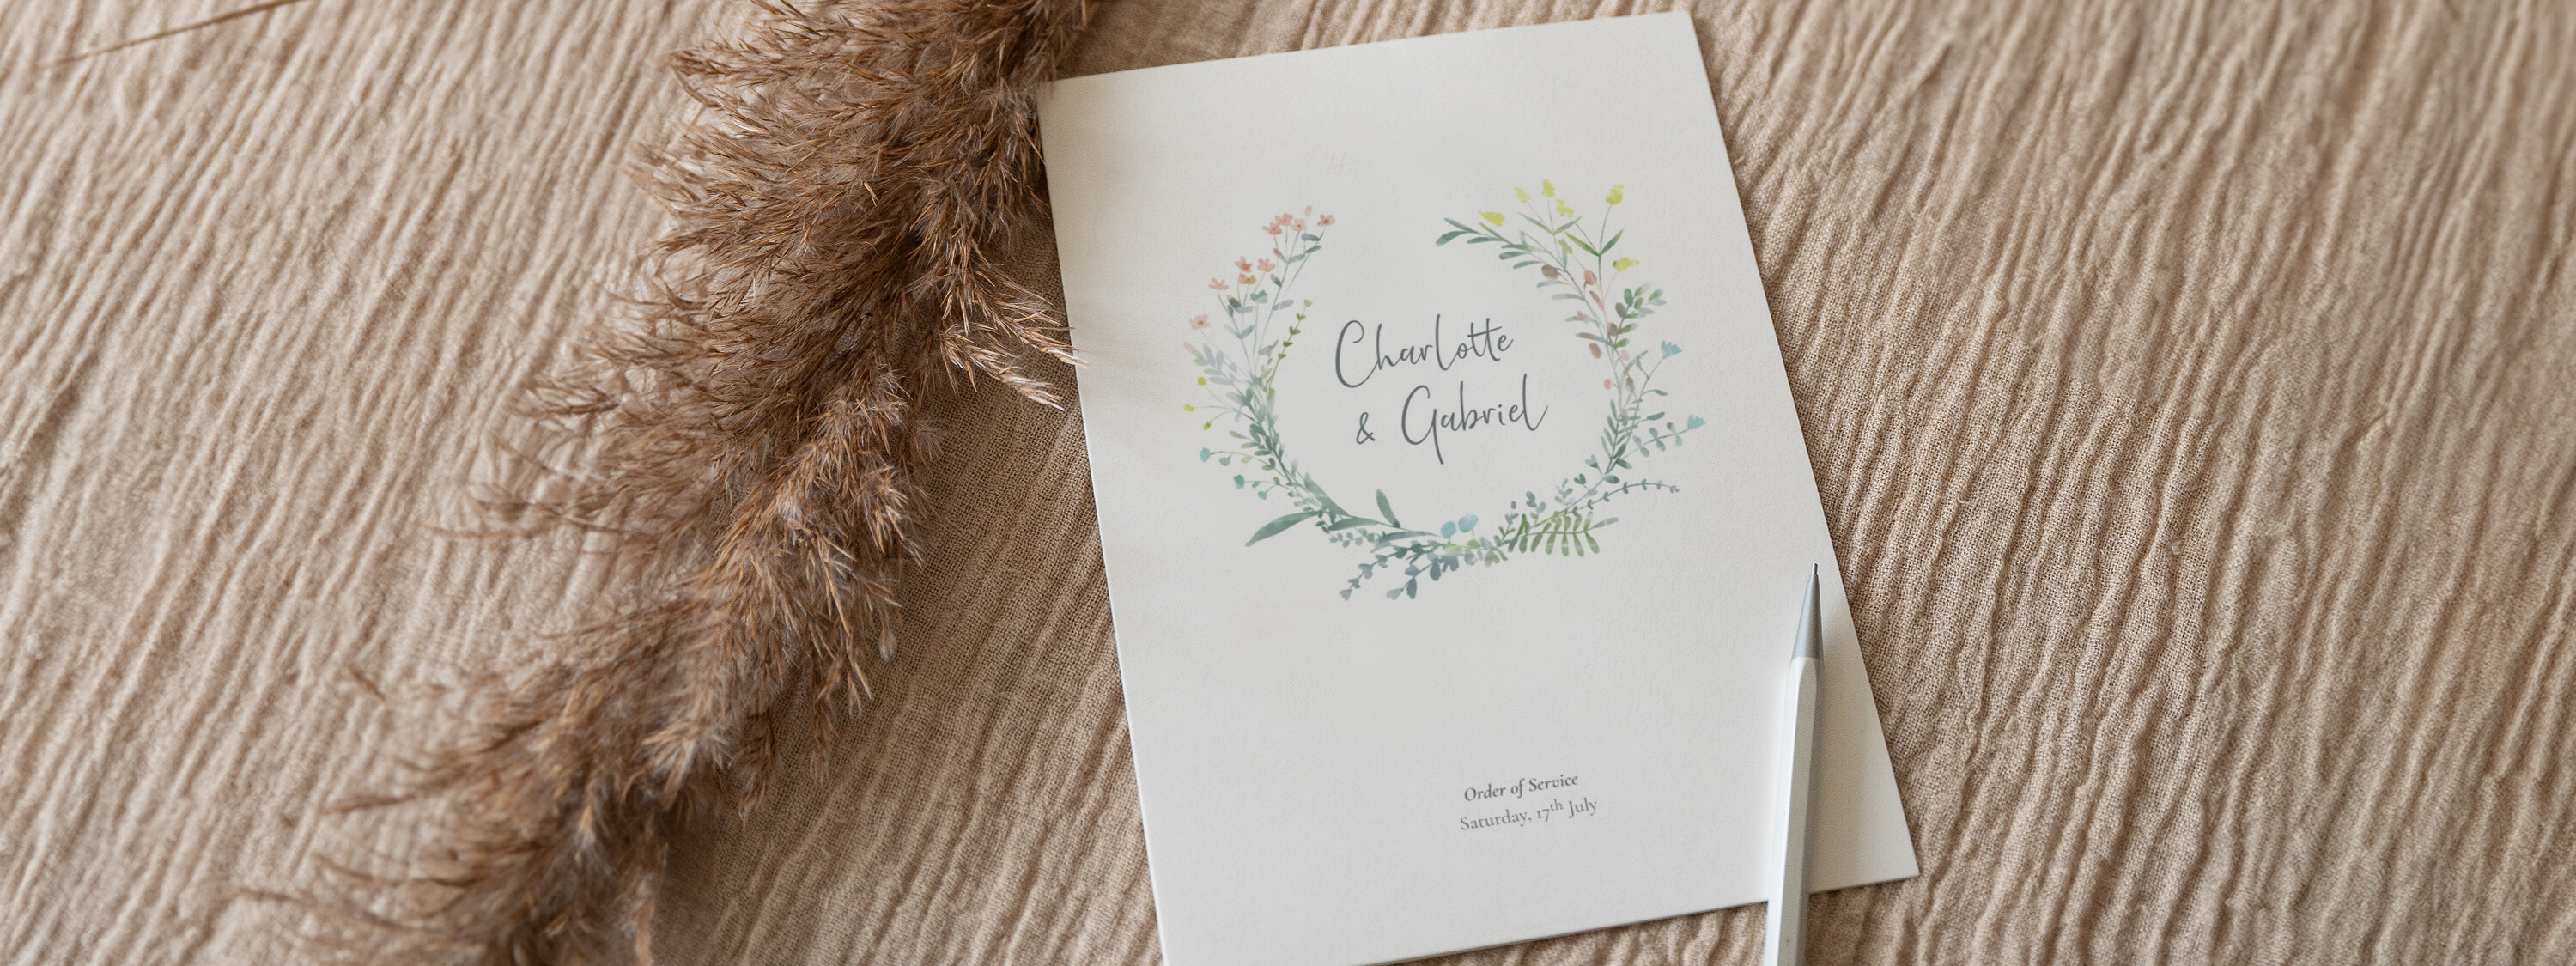 Modern Wedding Order of Service Booklet Covers